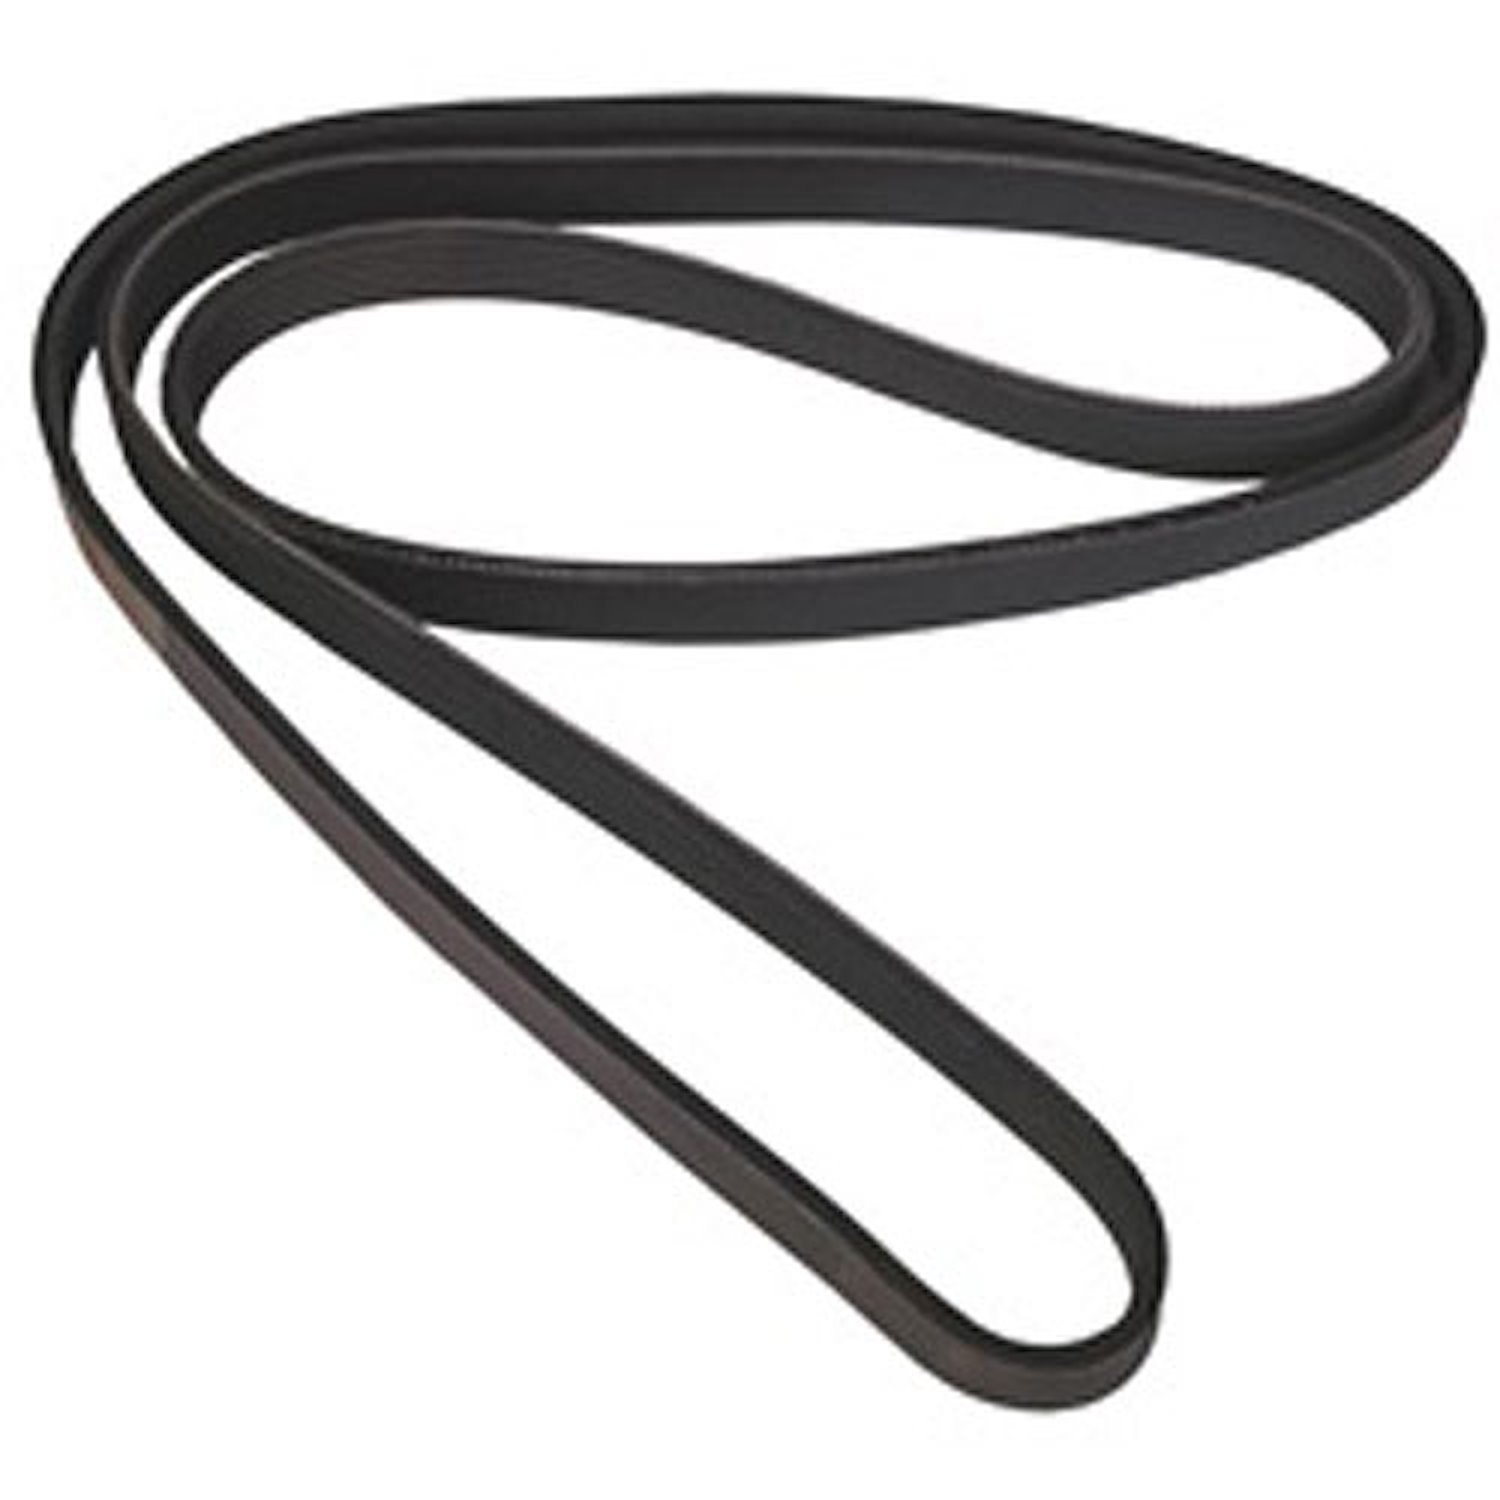 Replacement serpentine belt from Omix-ADA, Fits 07-10 Jeep Compass and Patriots with a 2.0L or 2